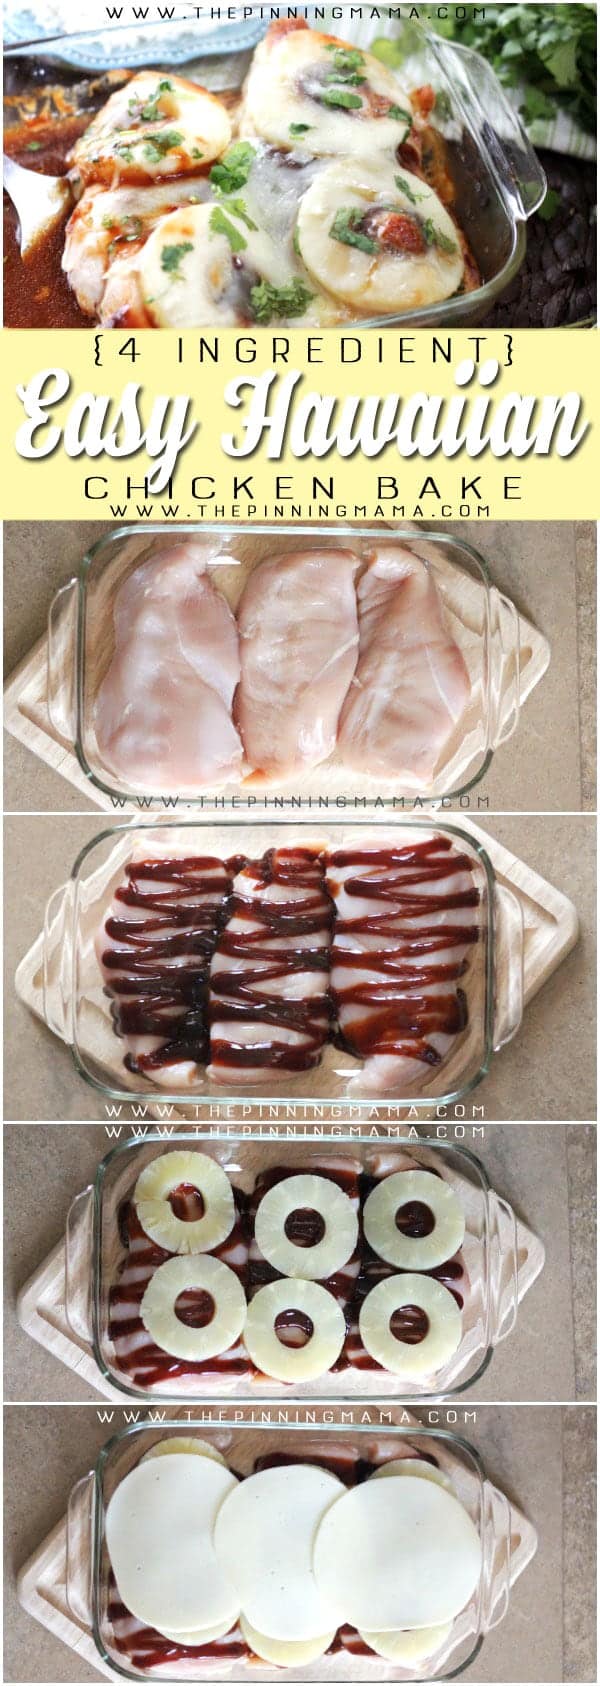 Hawaiian Chicken Bake Recipe - Only 4 ingredients and 4 steps to get it made and in the oven ready for a quick weeknight dinner idea!